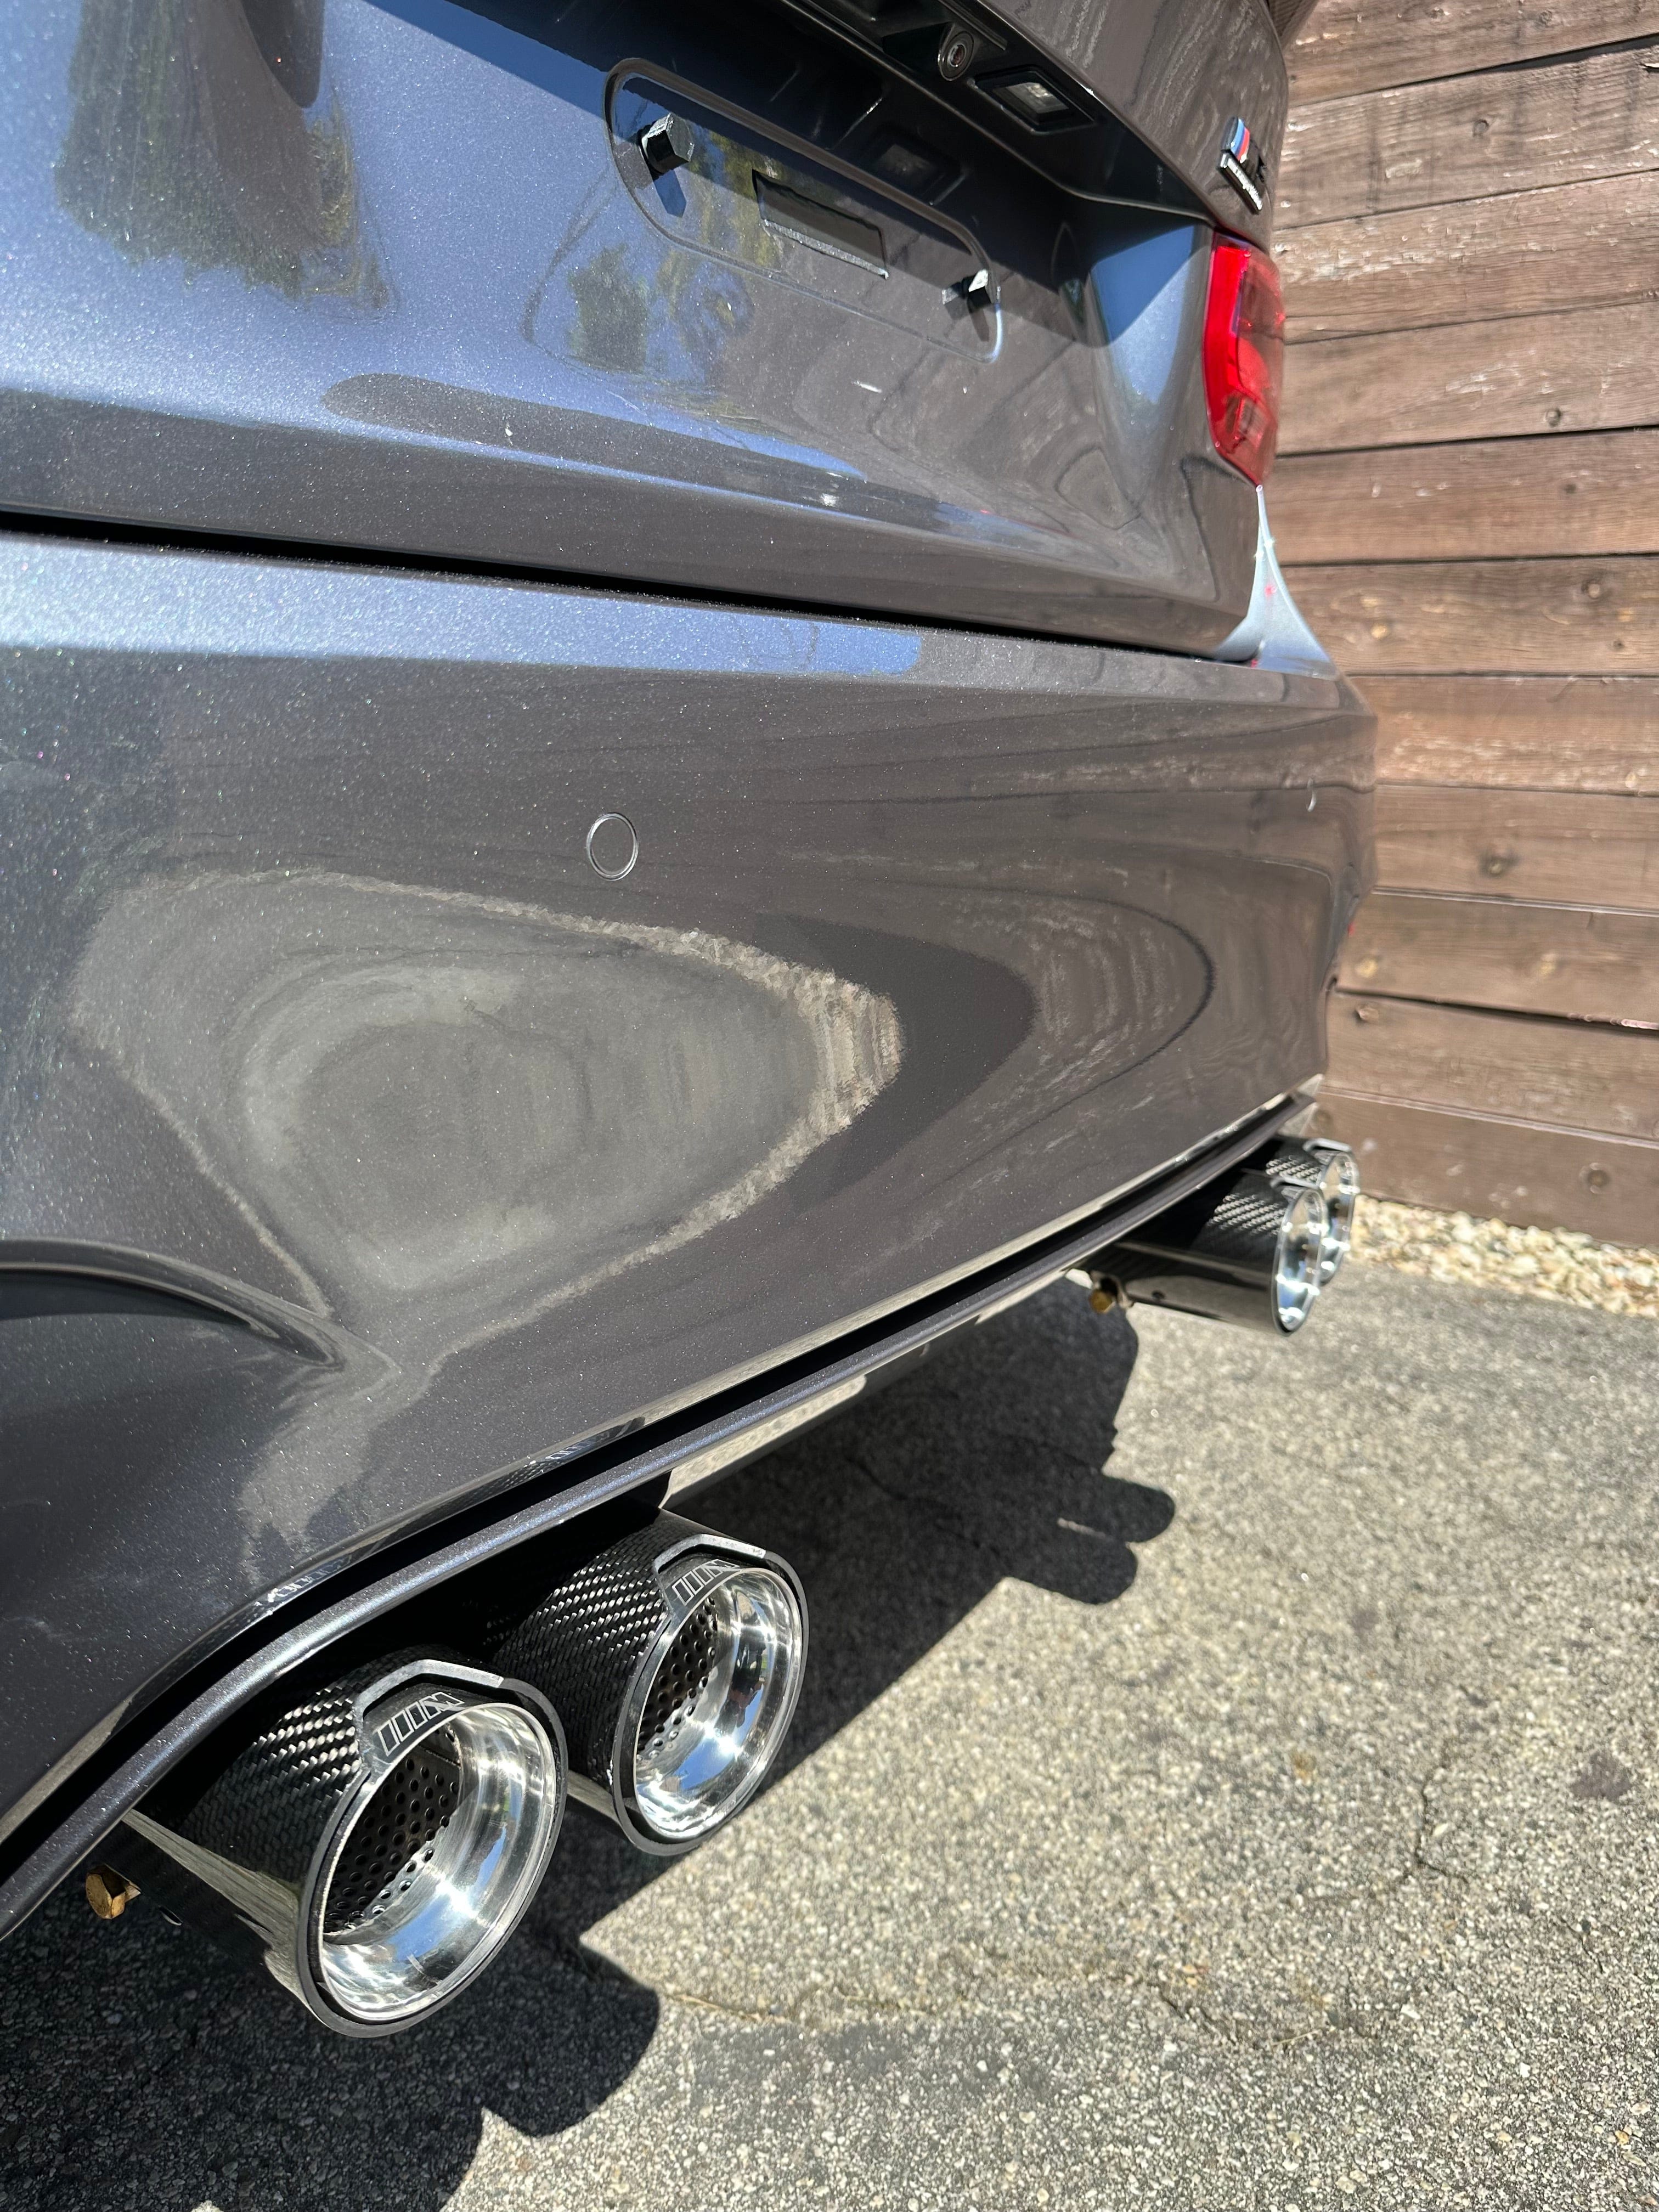 West Coast Euros Misc. Exterior Polished Silver Inner BMW F8x M2 M3 M4 M Style Carbon Fiber Exhaust Tips (4 PC)